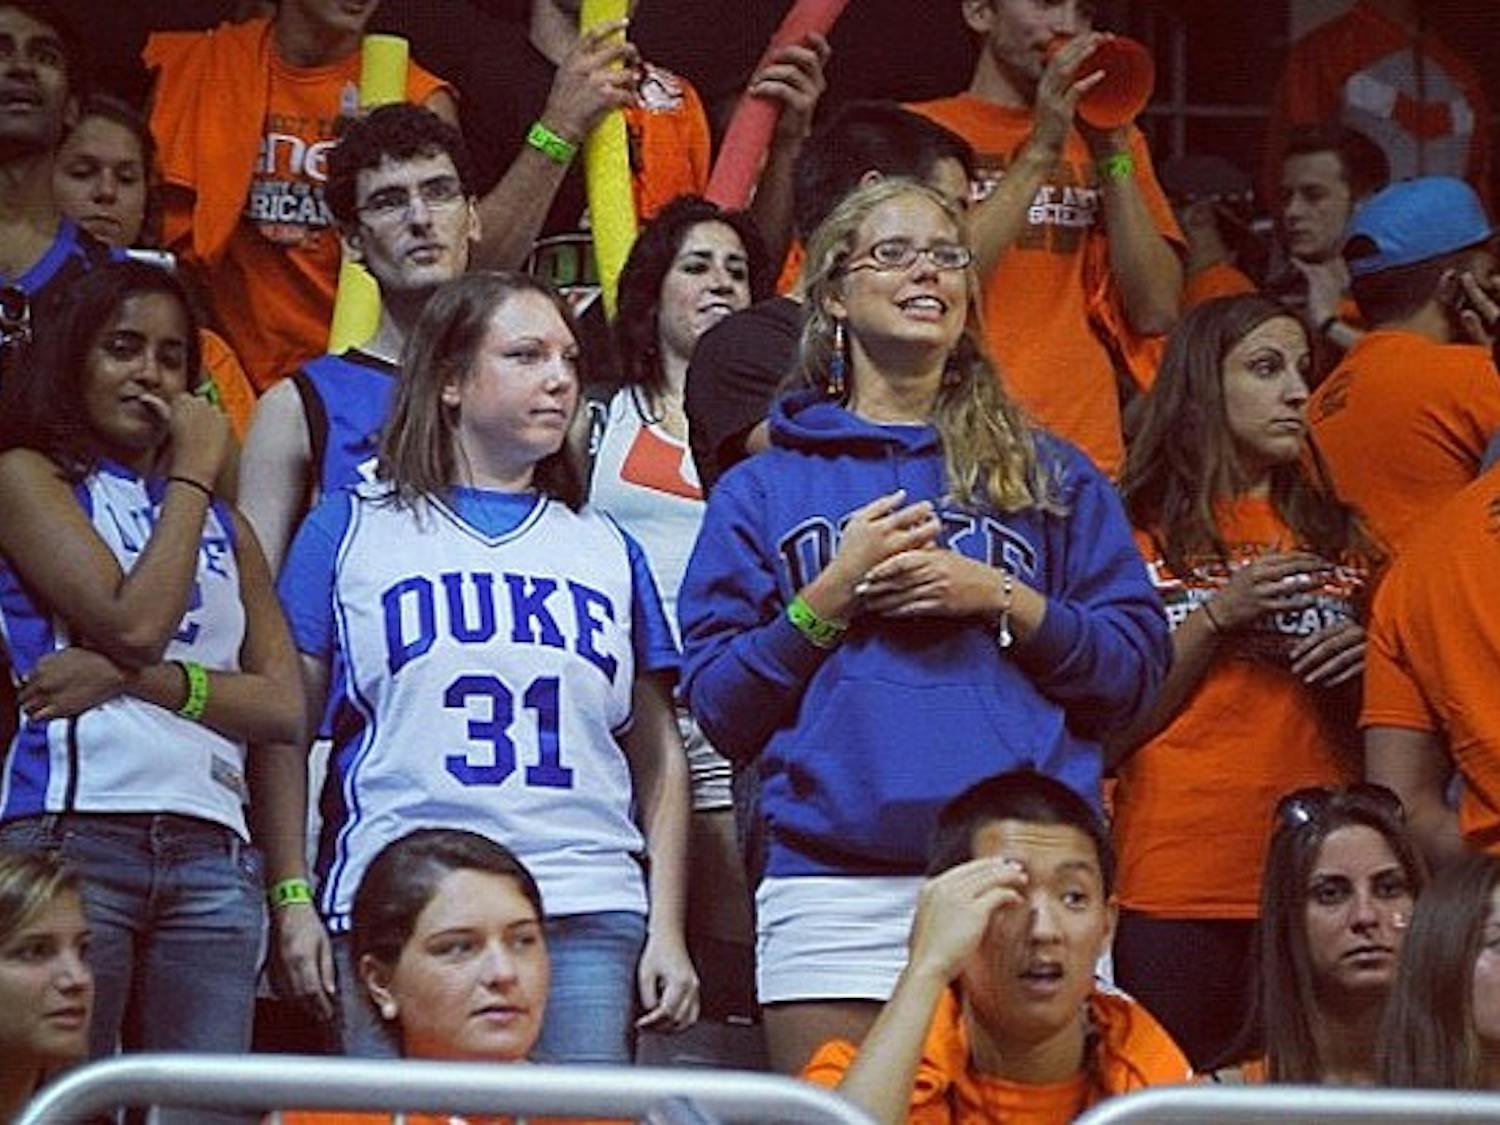 A photo from DukeBluePlanet of Michelle Picon and her friends at the Miami game captioned "Found brave Duke fans in the Miami student section."